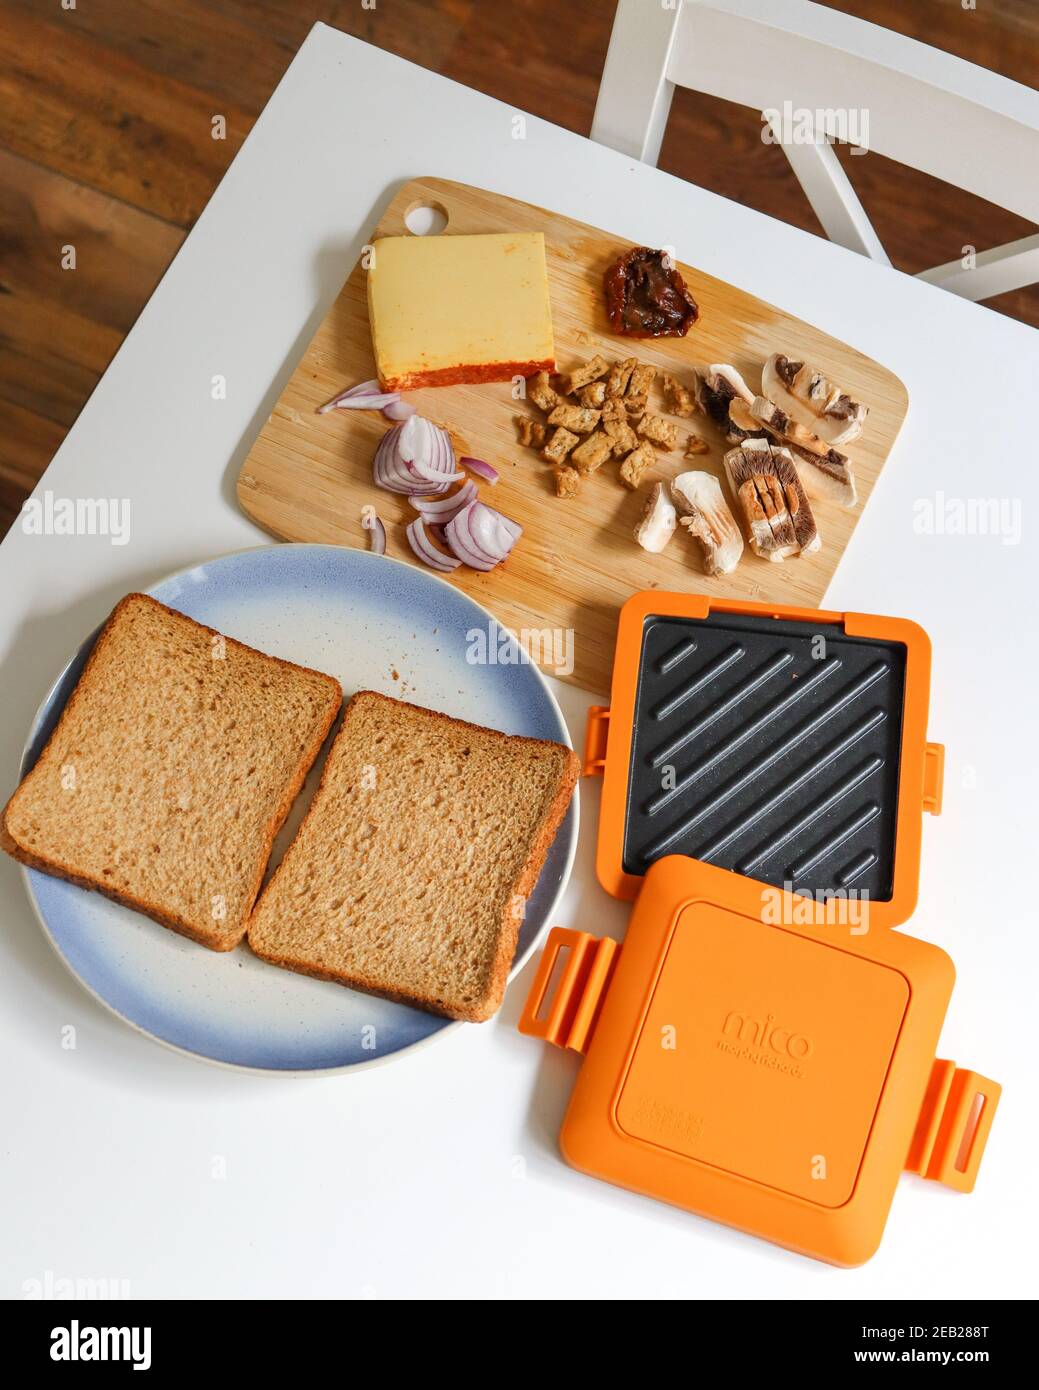 Morphy Richards Mico Toastie toasted sandwiches microwave cookware kitchen  food preparation cooking snack grilled sandwich ve Stock Photo - Alamy